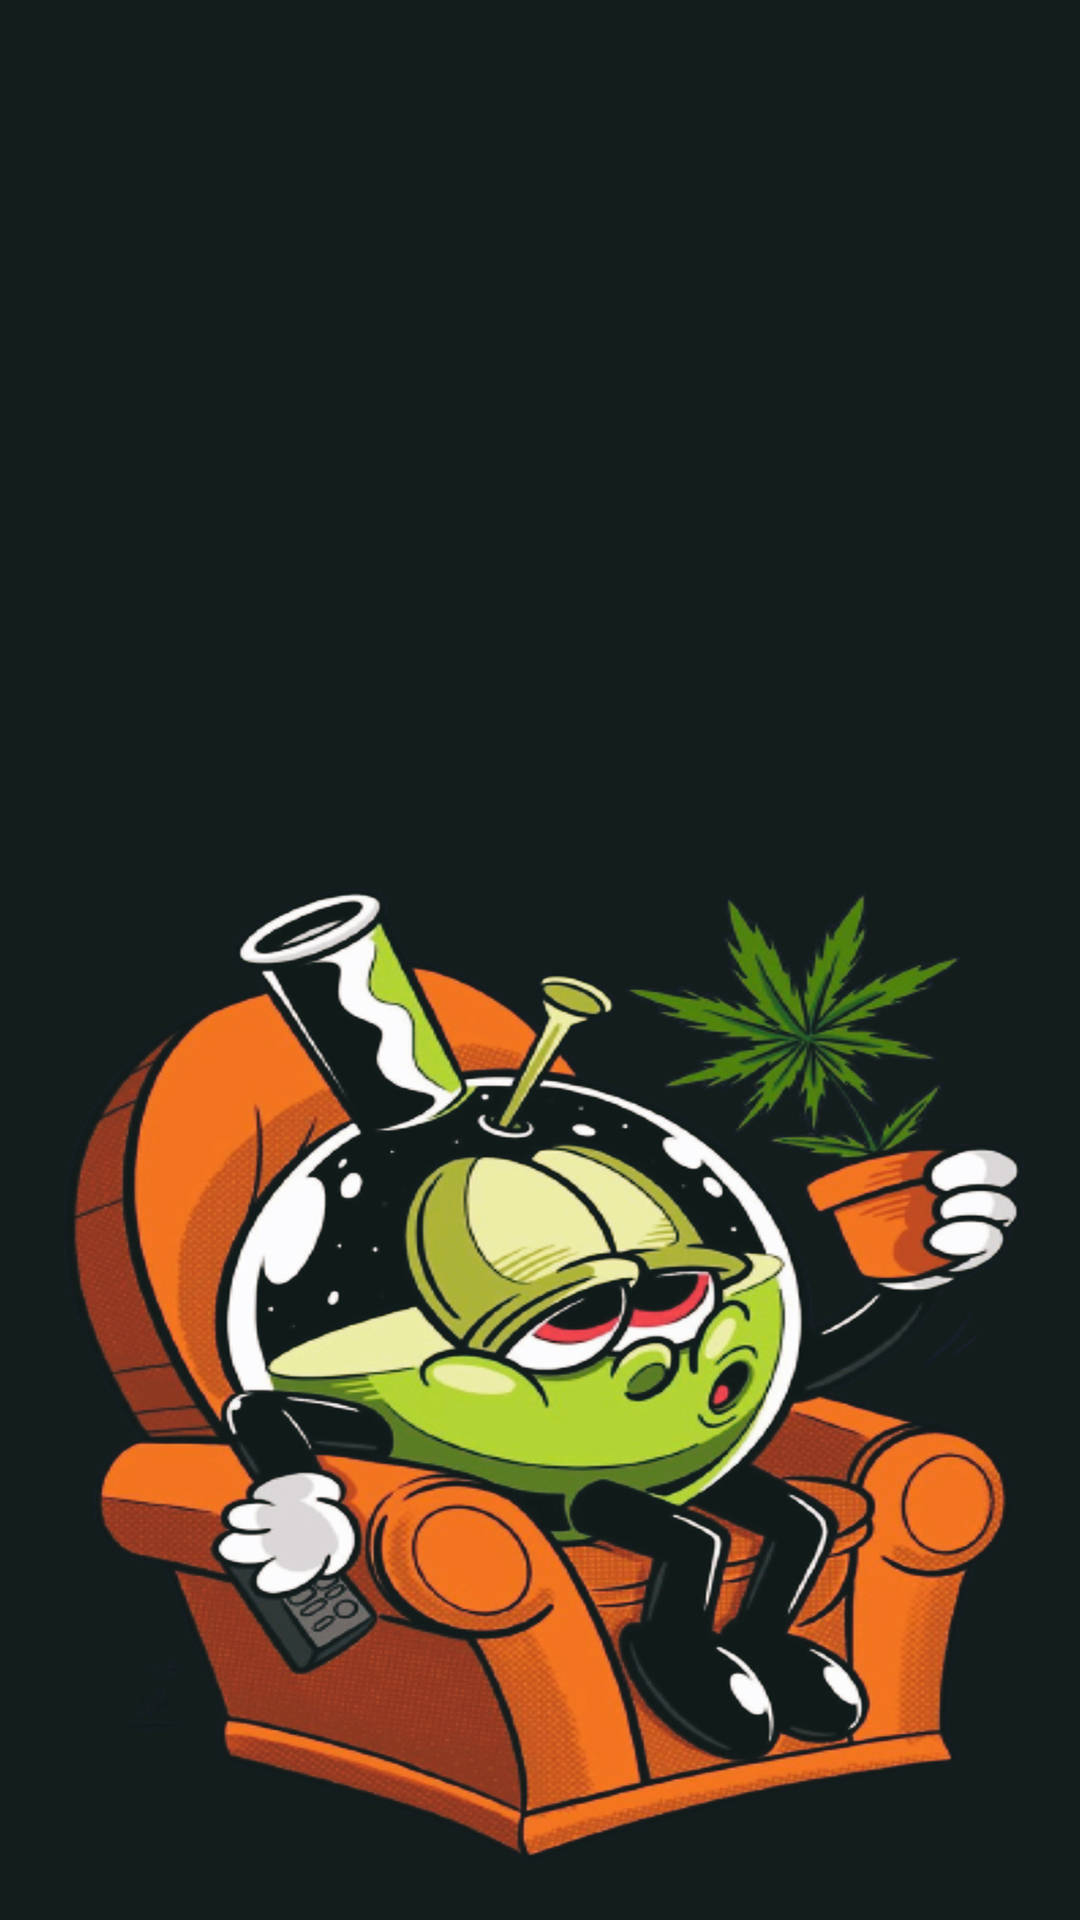 Get the Funk Out with Cartoon Weed Wallpaper